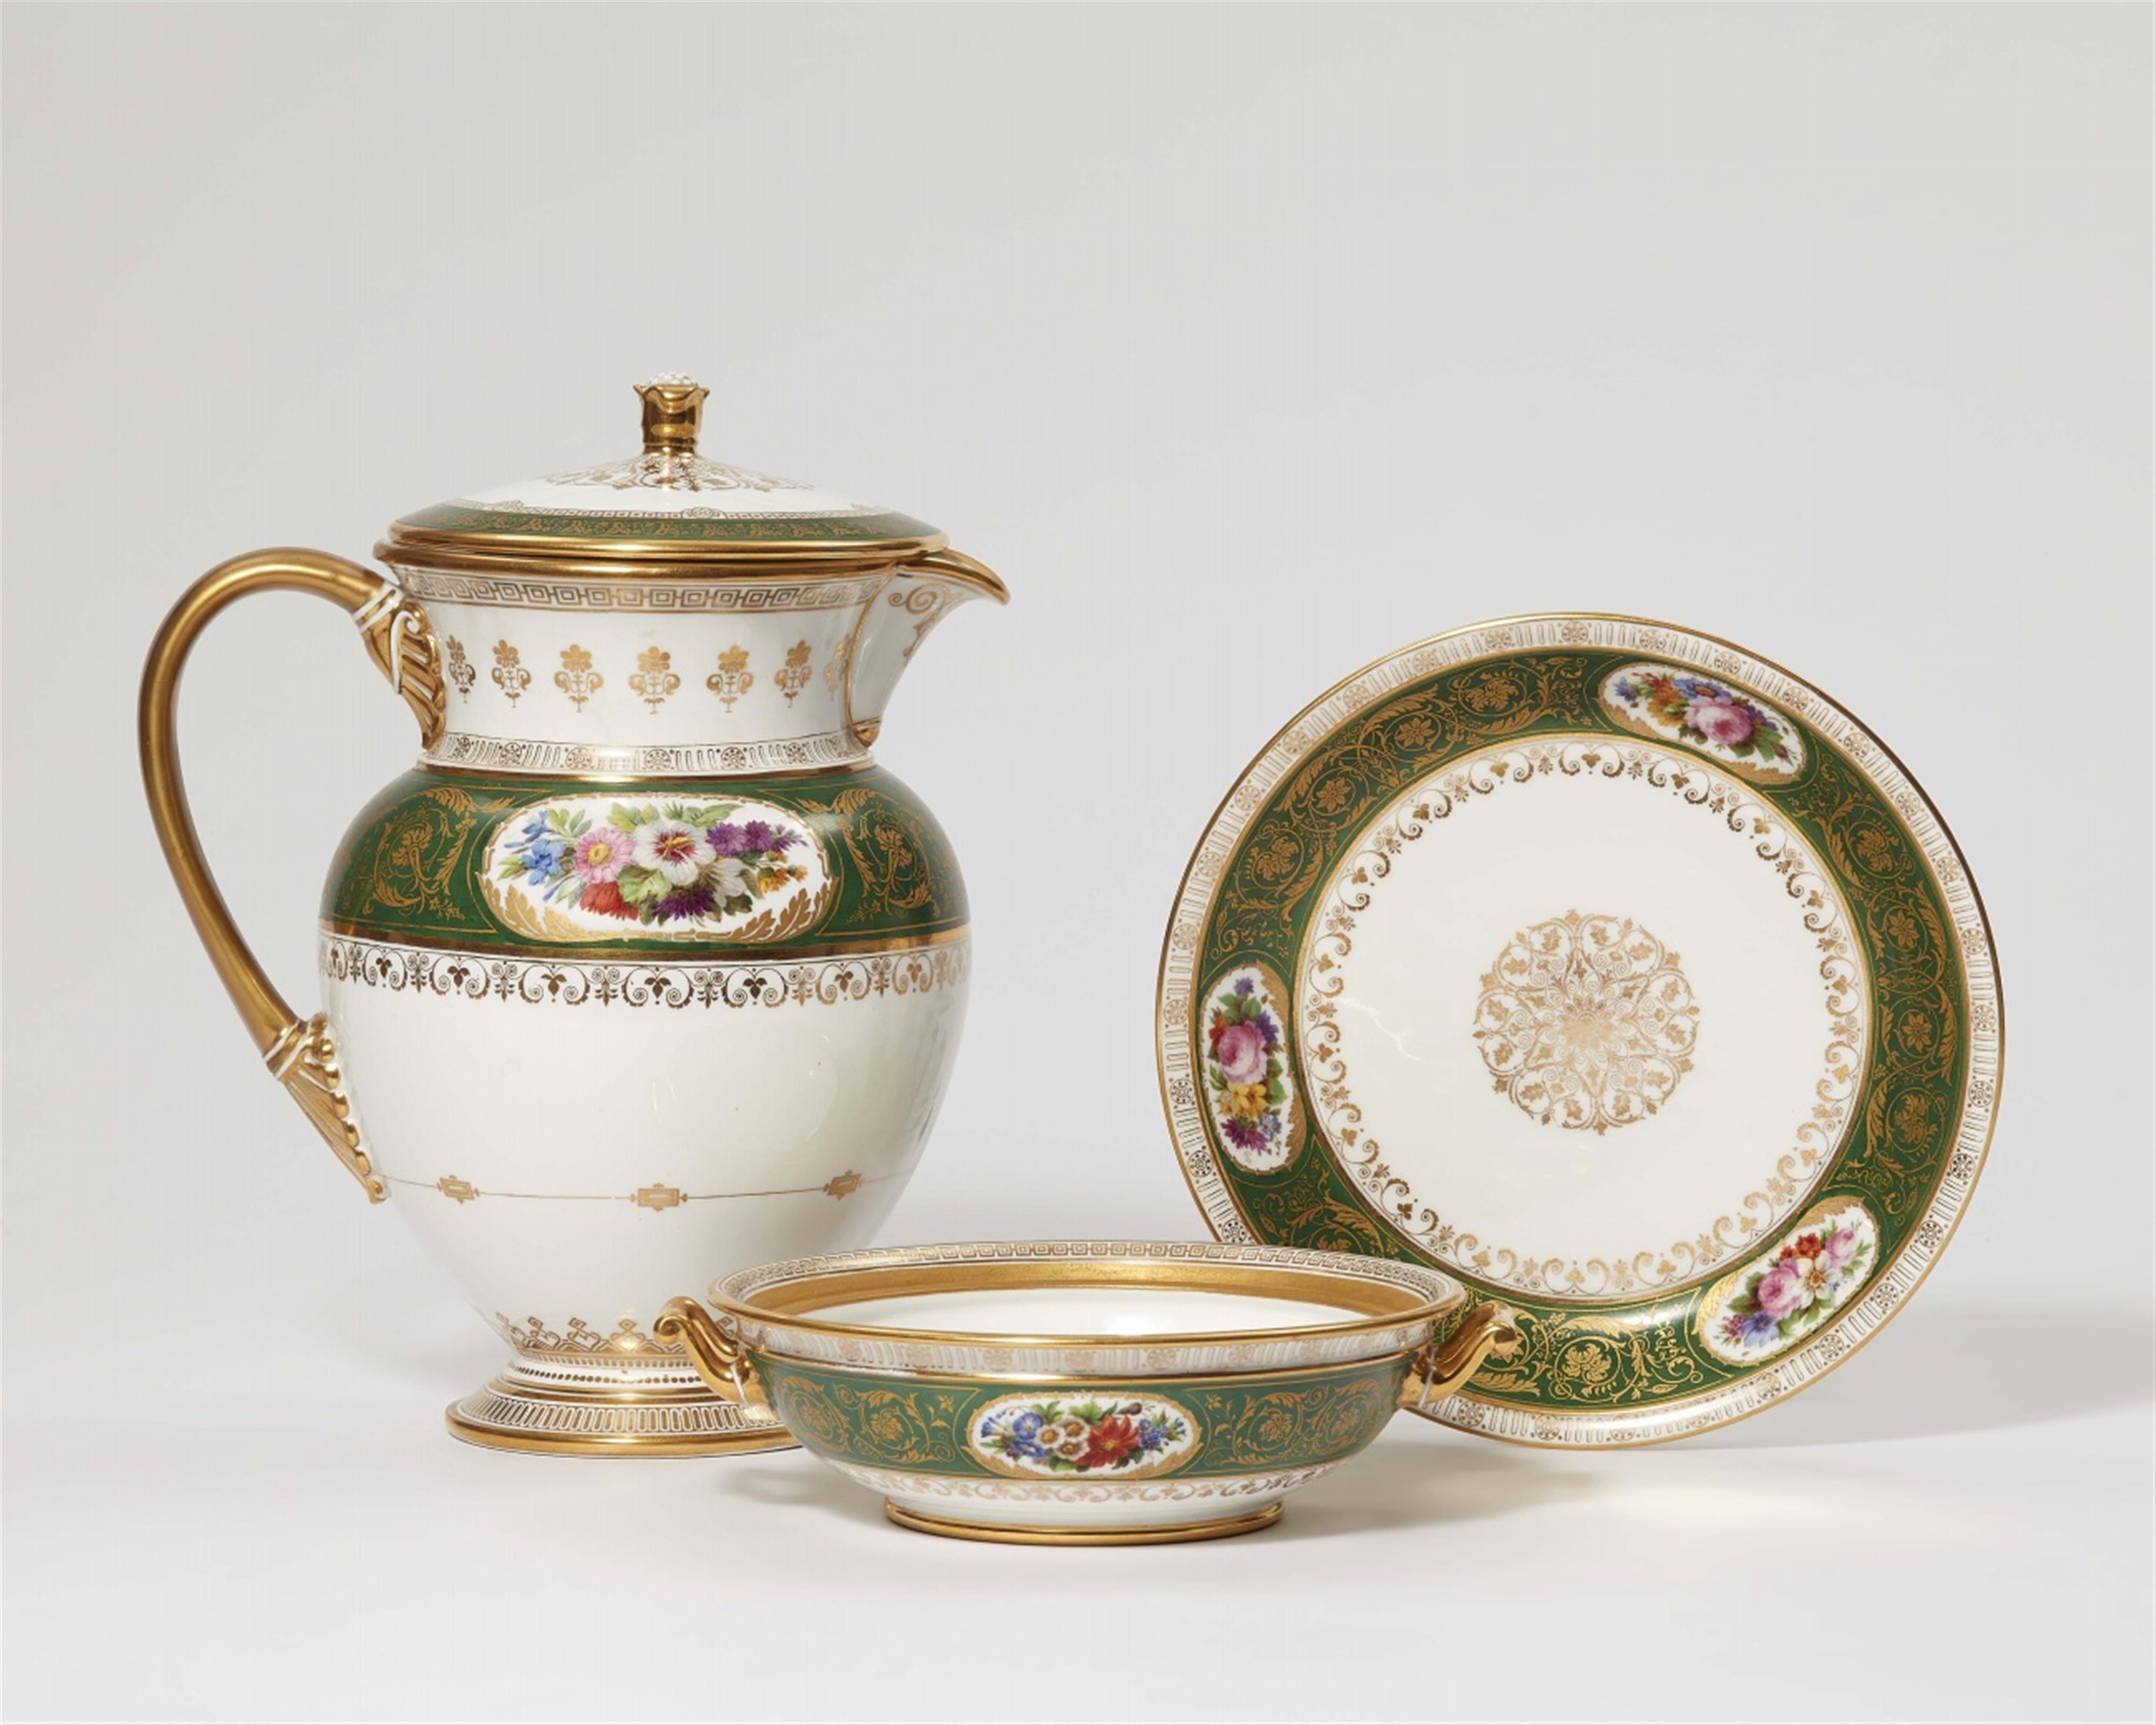 A Sèvres porcelain pitcher and tureen from the service for the Château de Randan - image-1